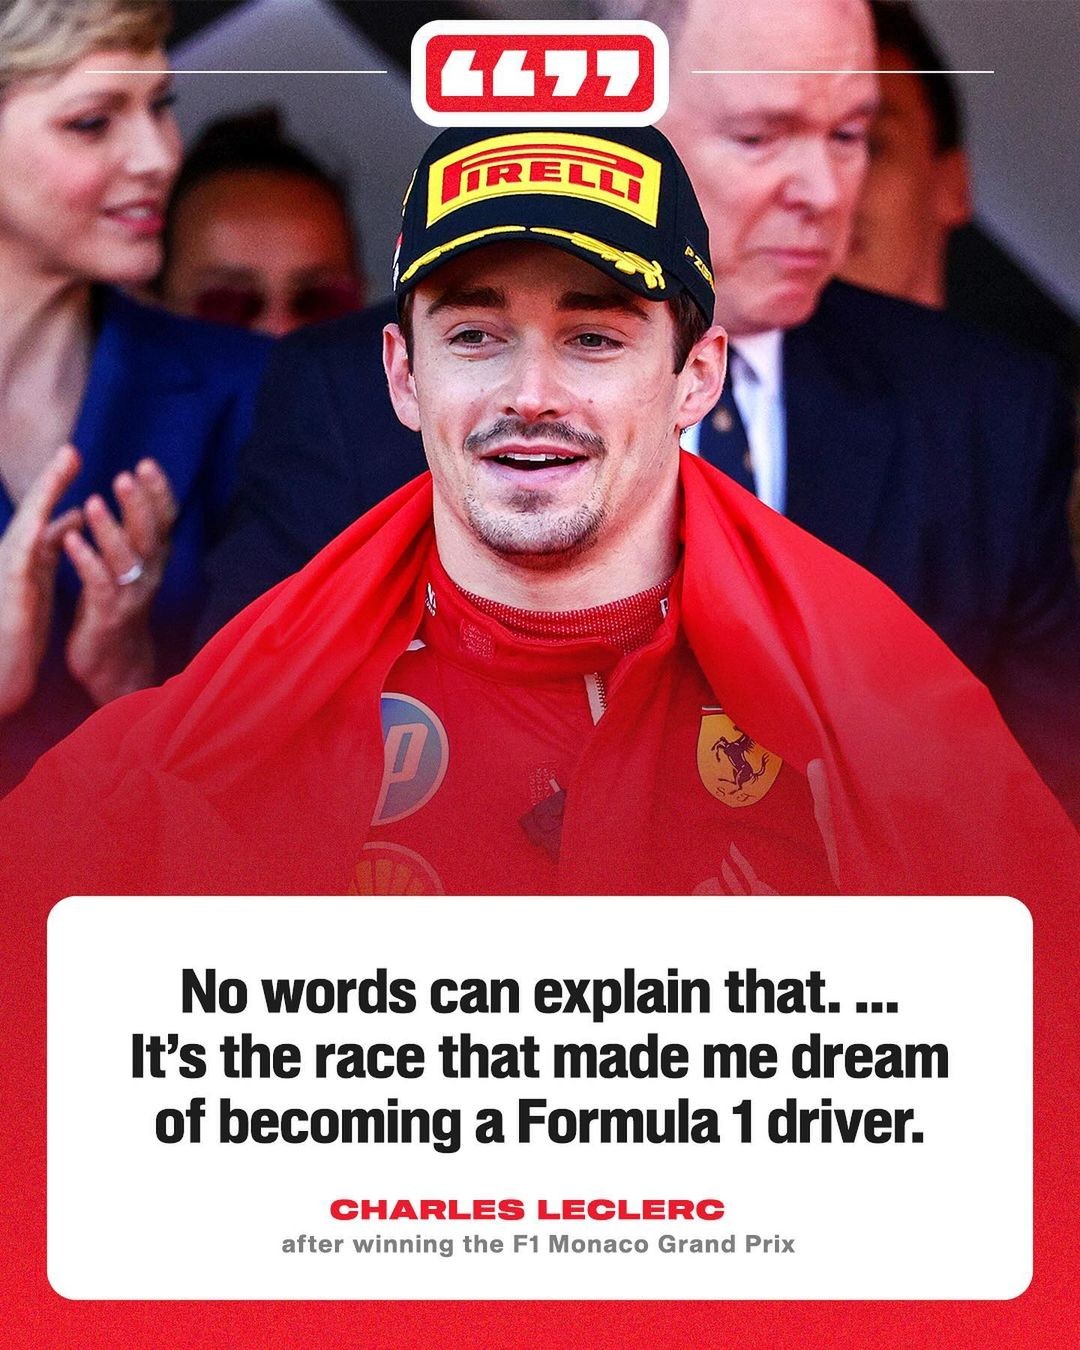 What a full circle moment for Charles Leclerc ????